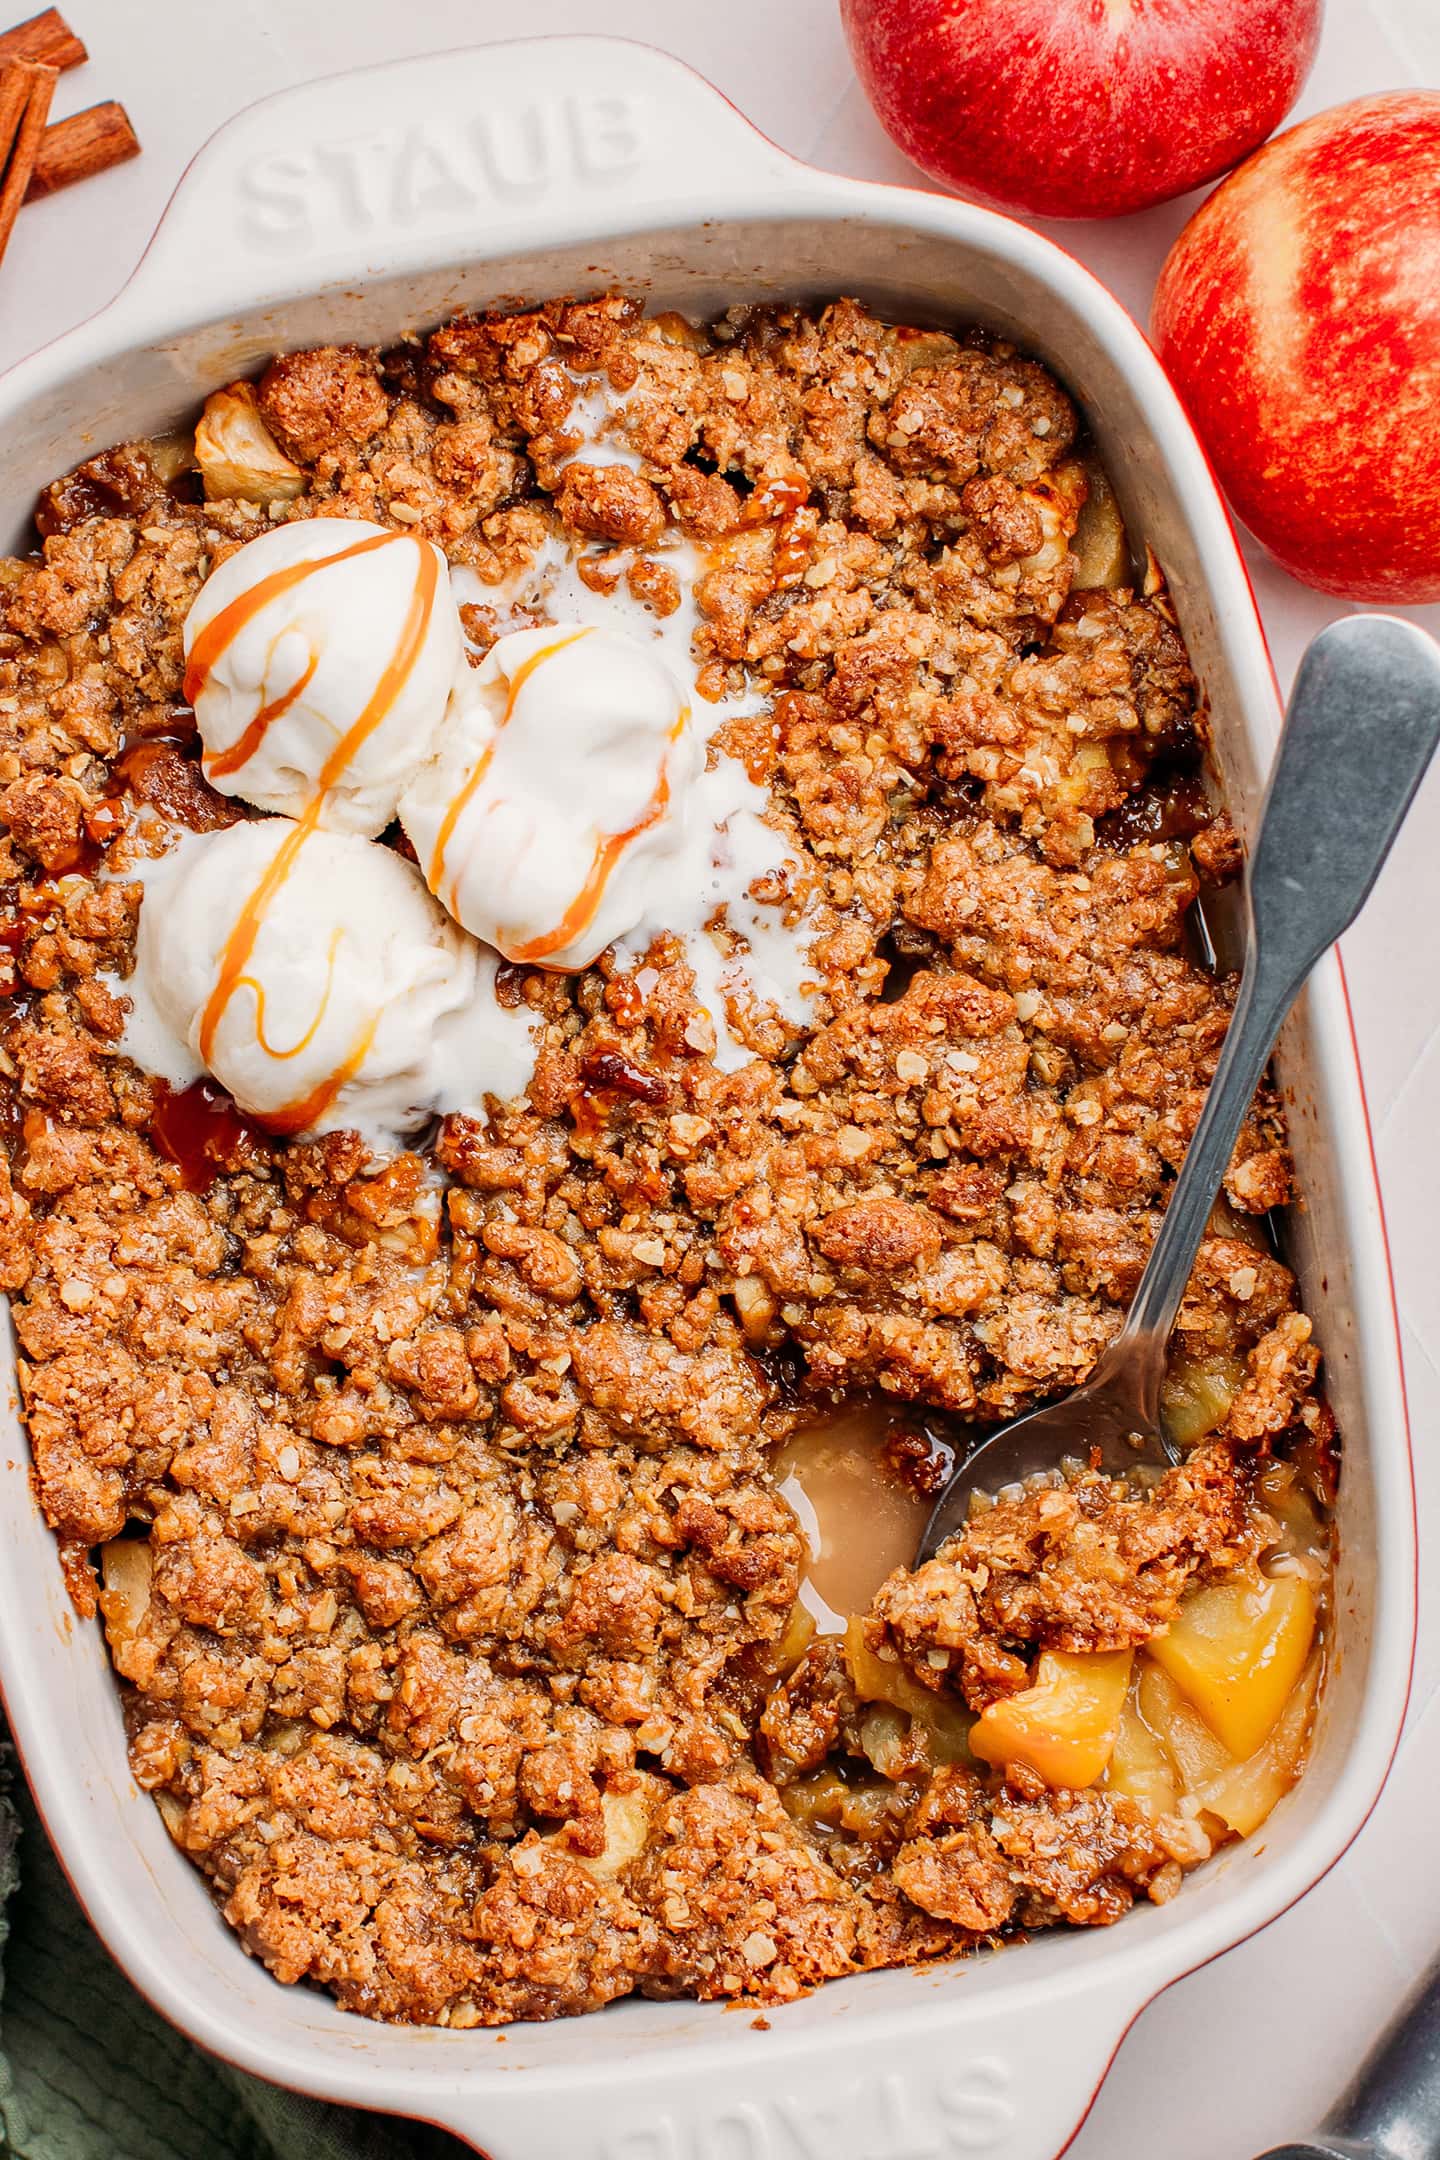 Apple crisp topped with scoops of vanilla ice cream and caramel sauce.